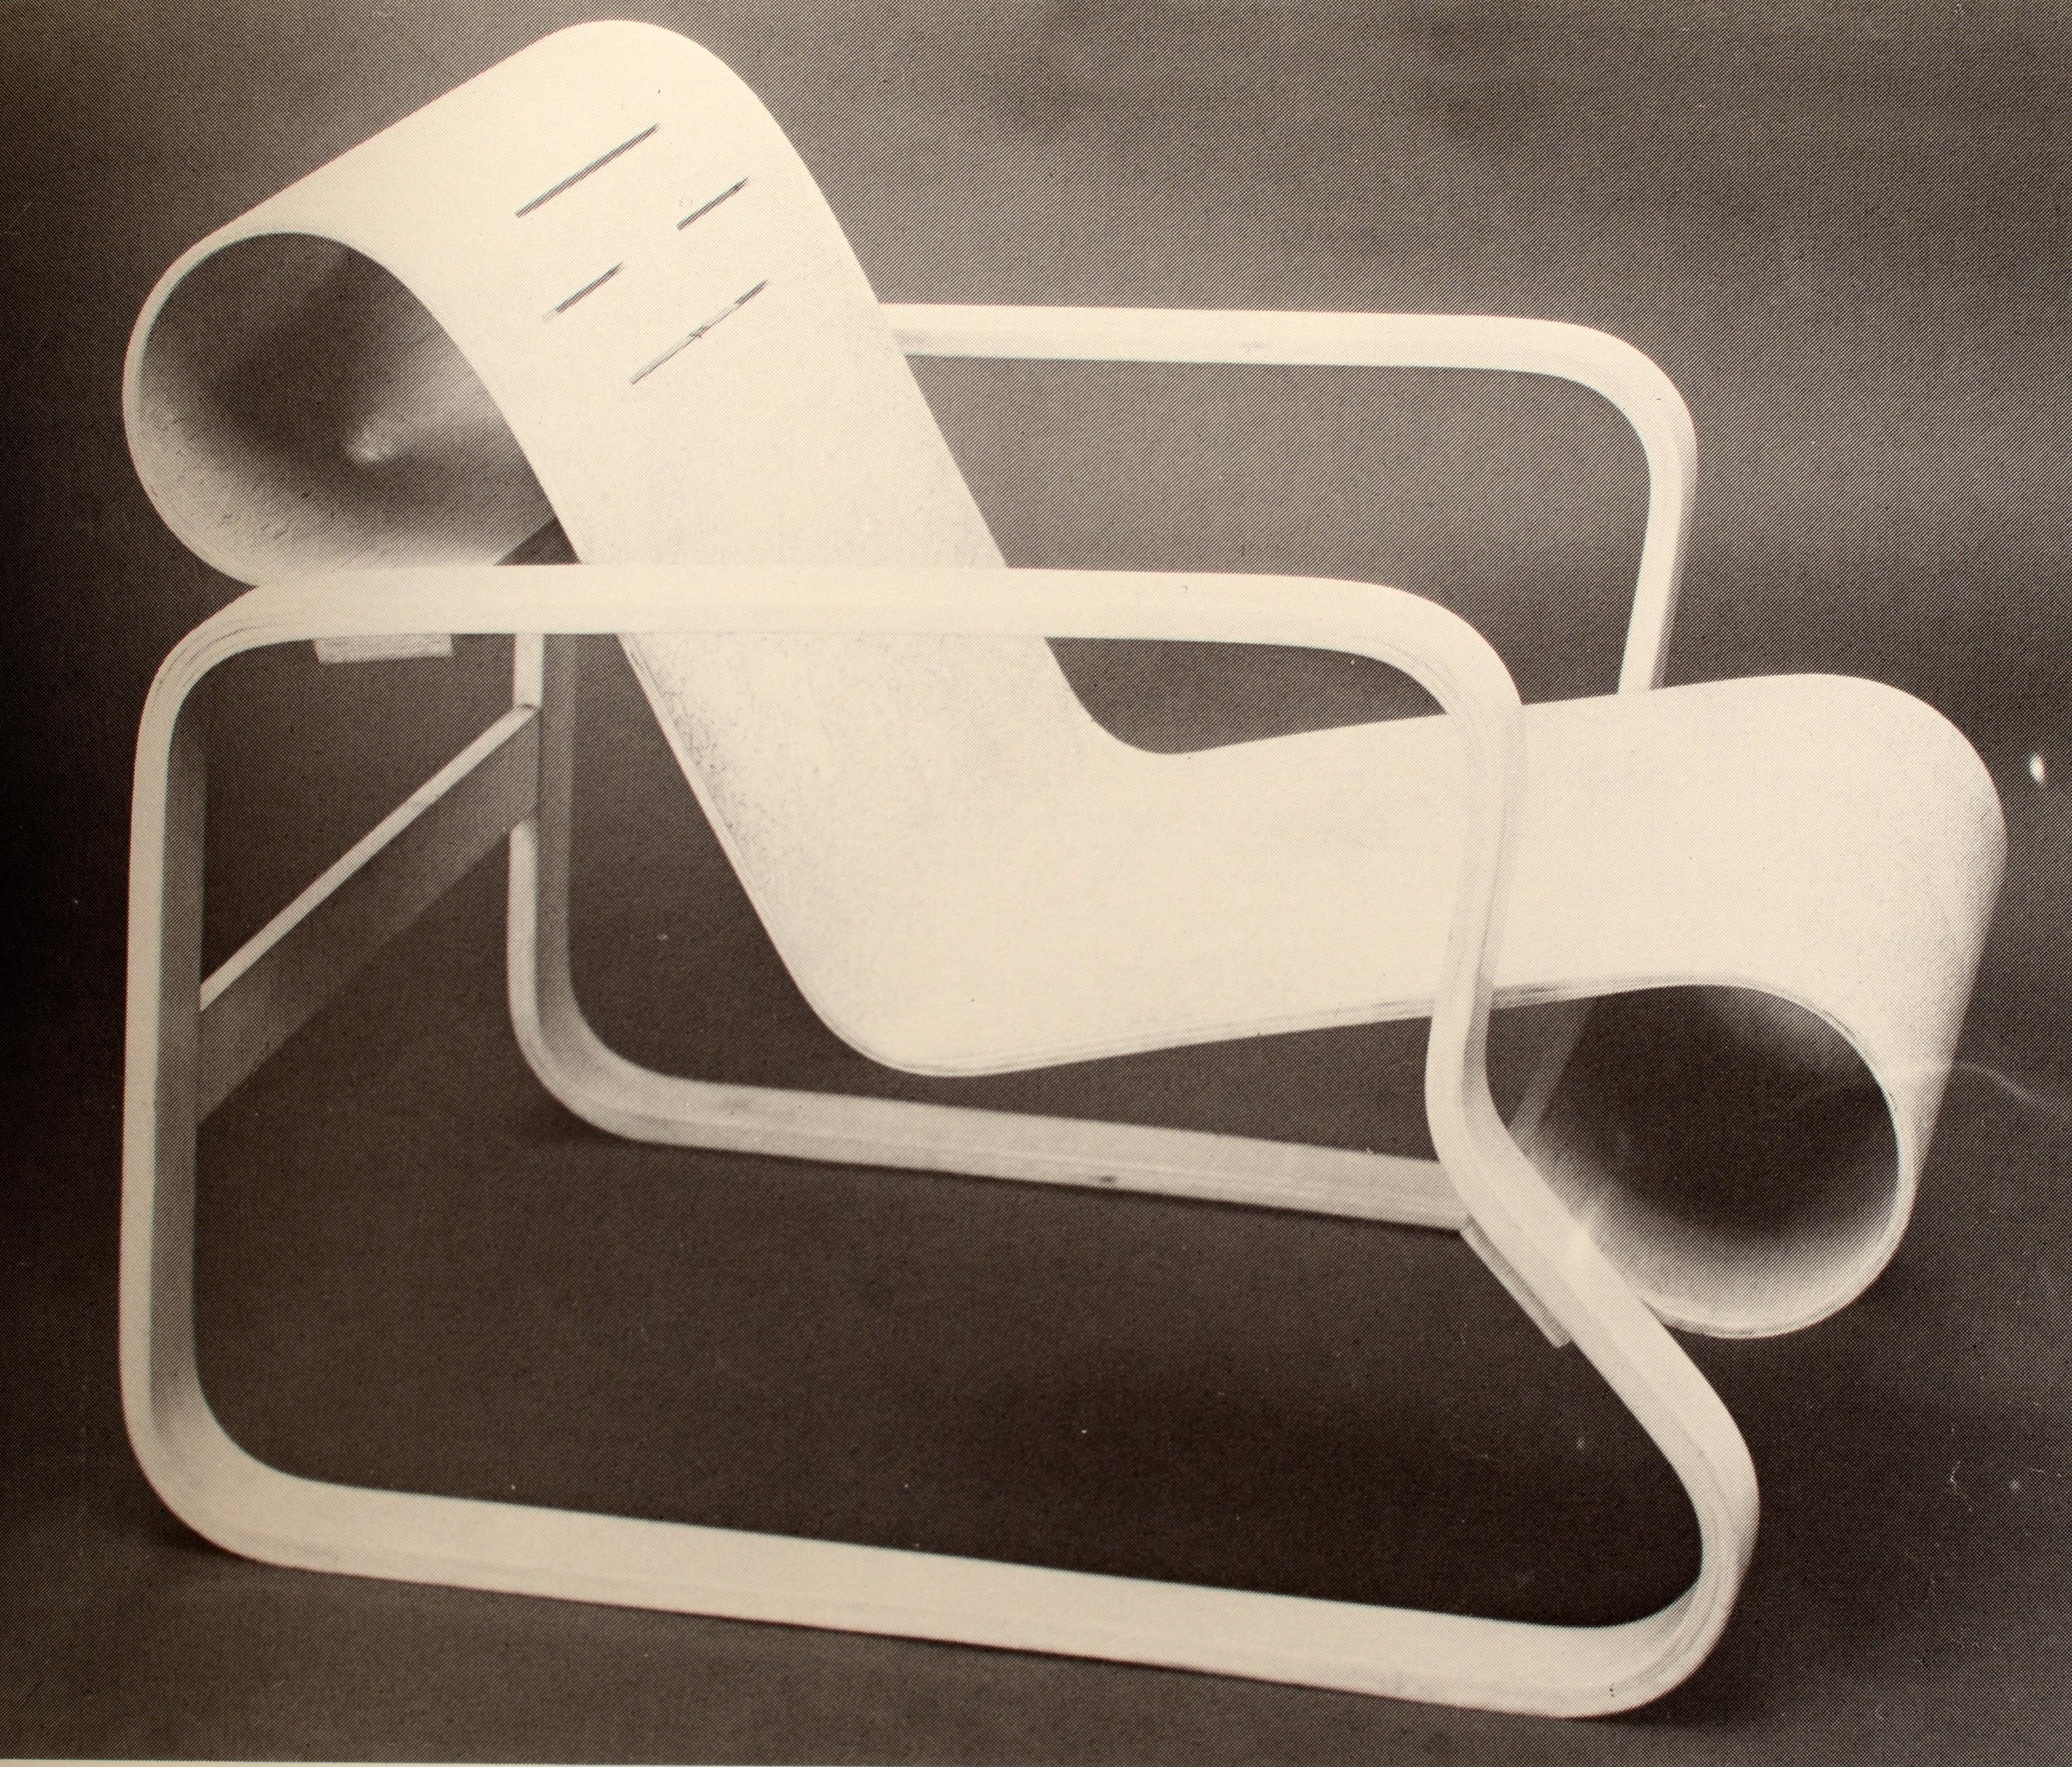 Furniture Designed by Architects by Marian Page, First Printing Paperback In Excellent Condition For Sale In valatie, NY